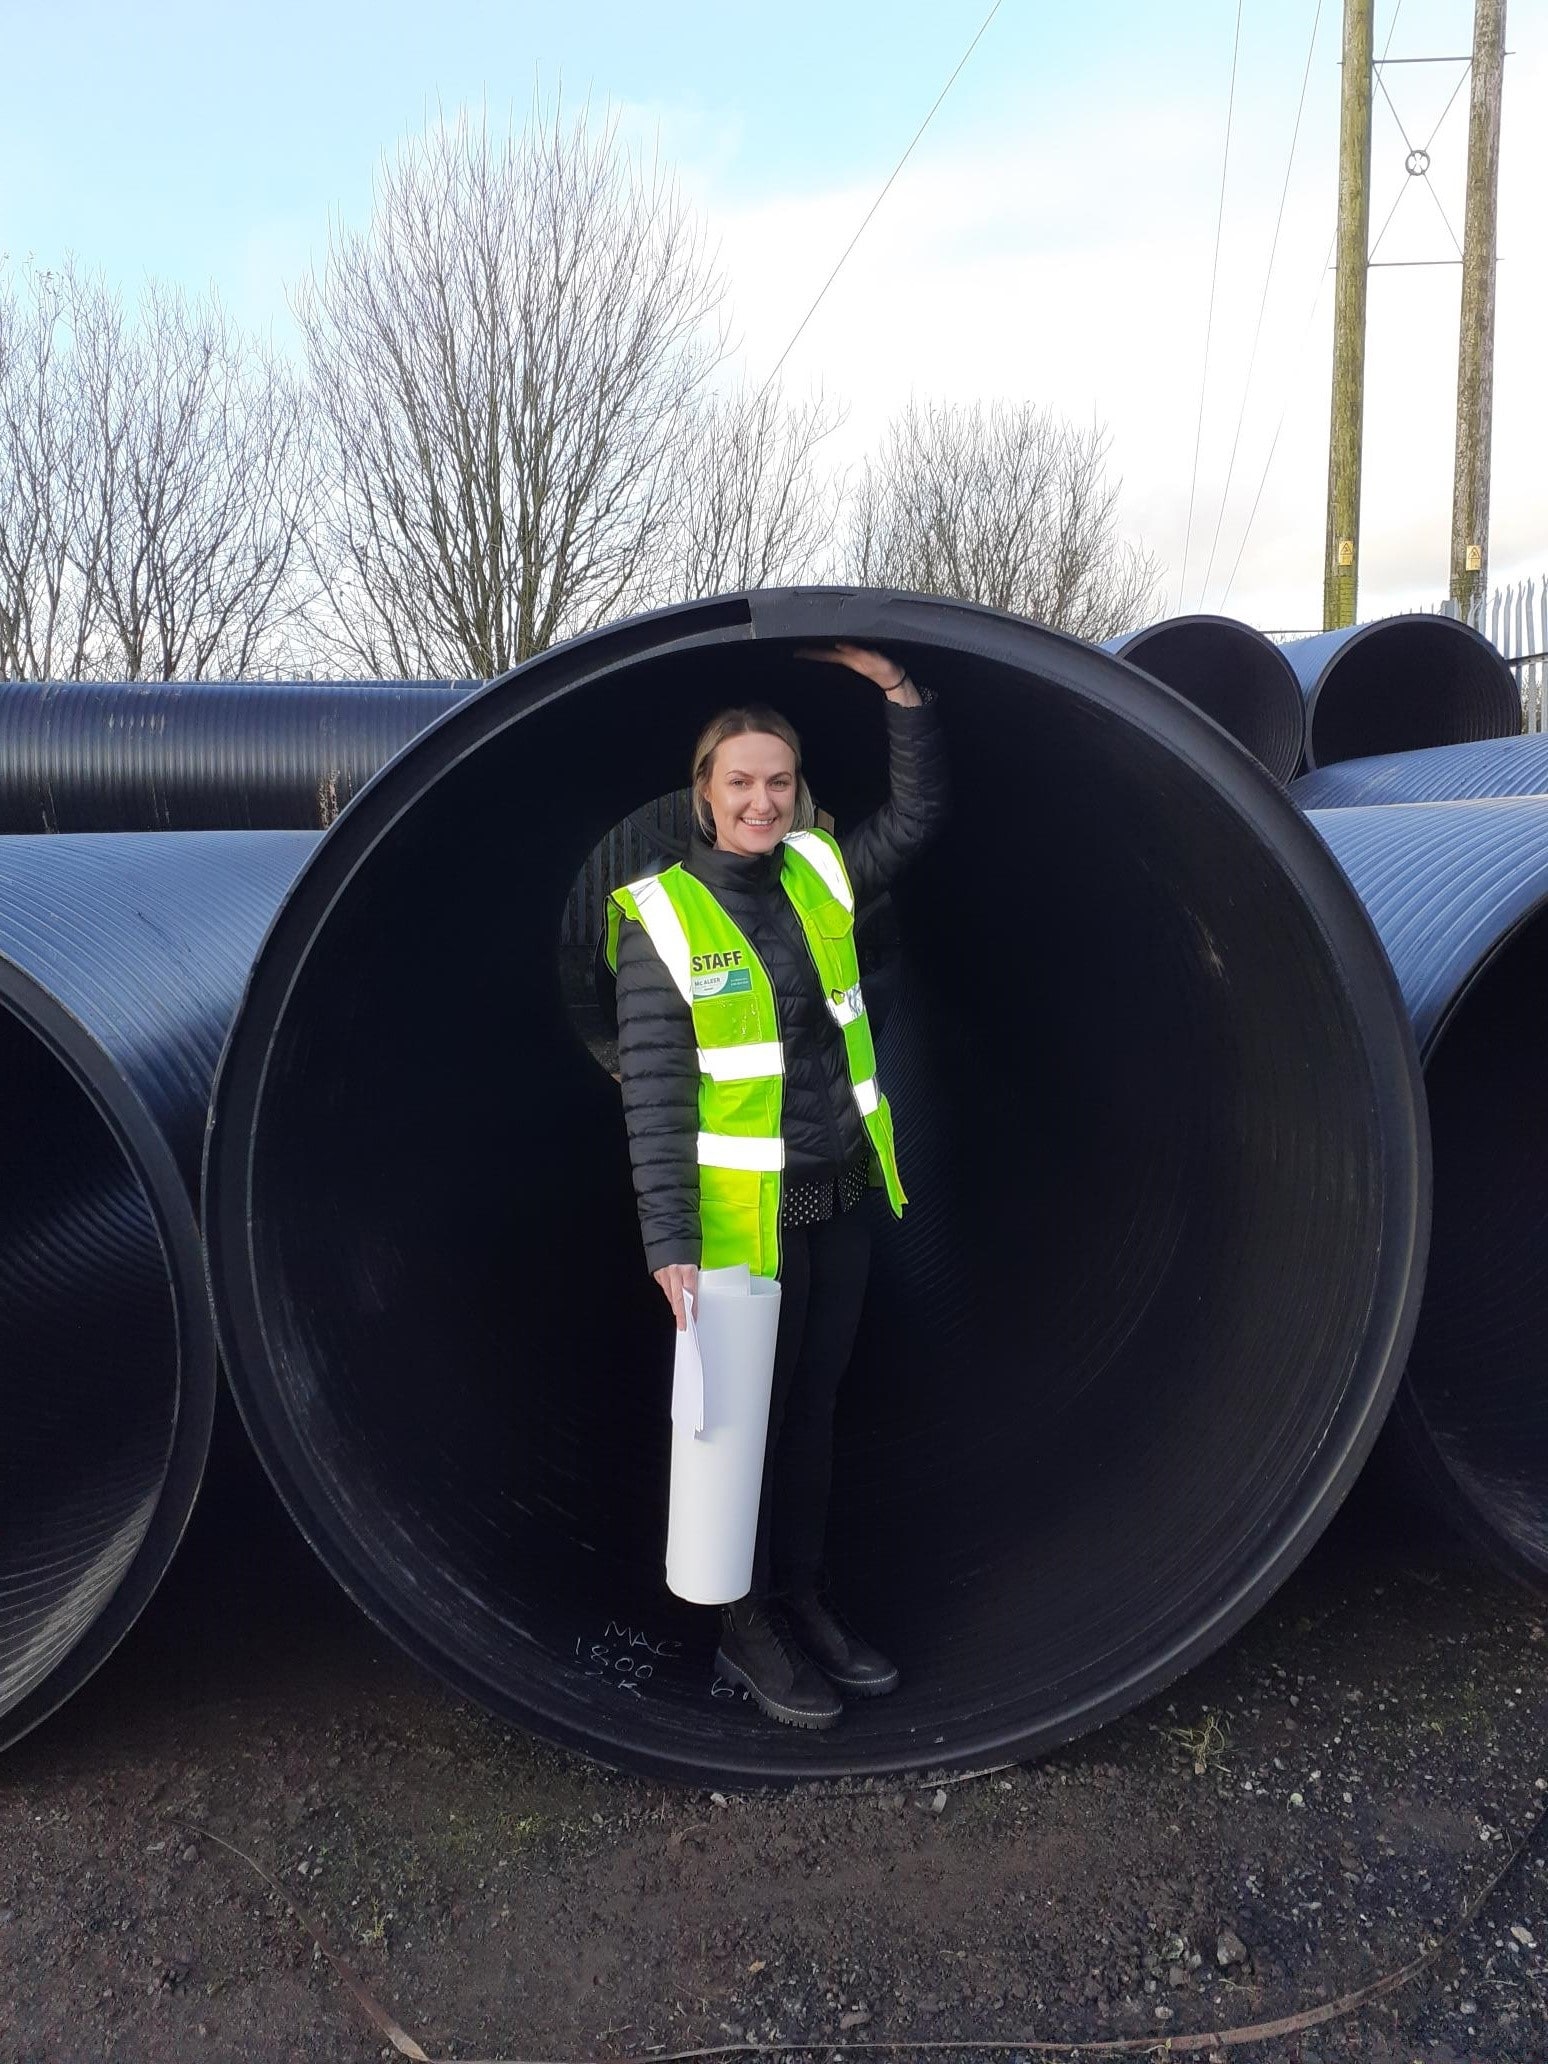 Big pipe or little girl?